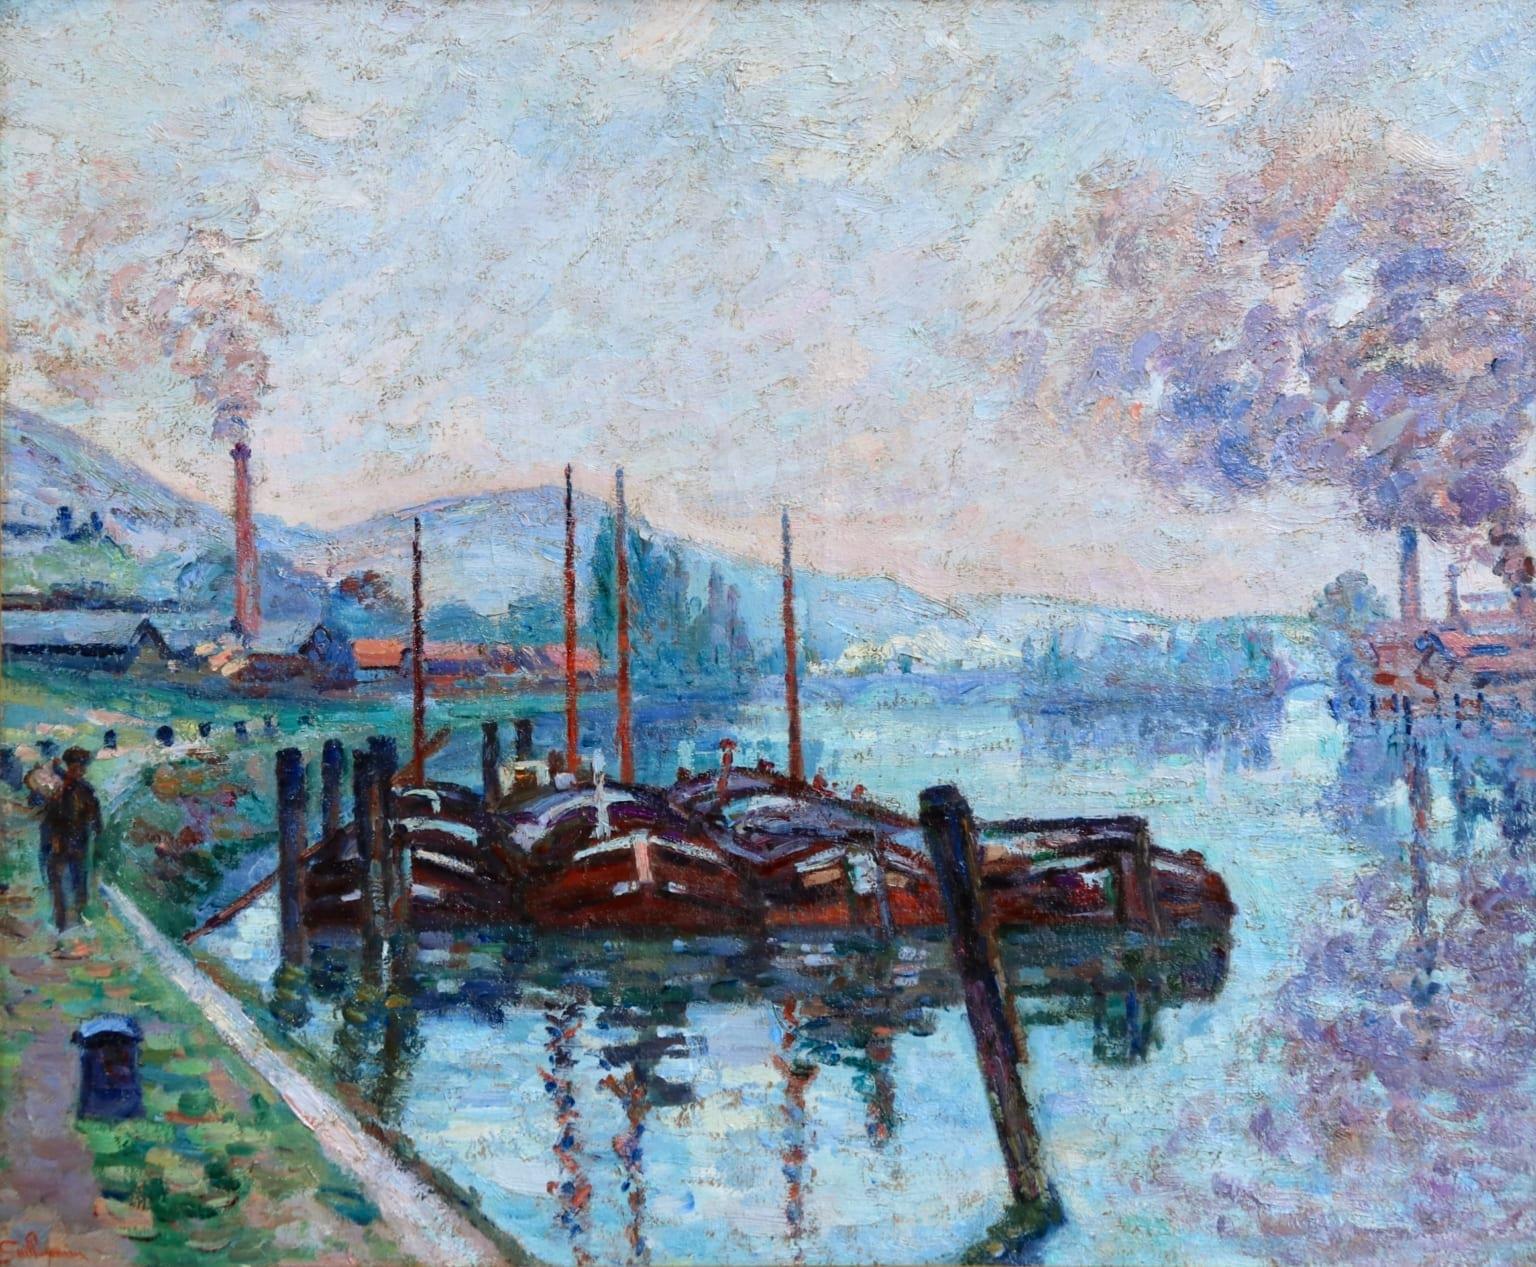 Jean Baptiste-Armand Guillaumin Figurative Painting - Morning Rouen - Impressionist Oil, Boats on River Landscape by Armand Guillaumin